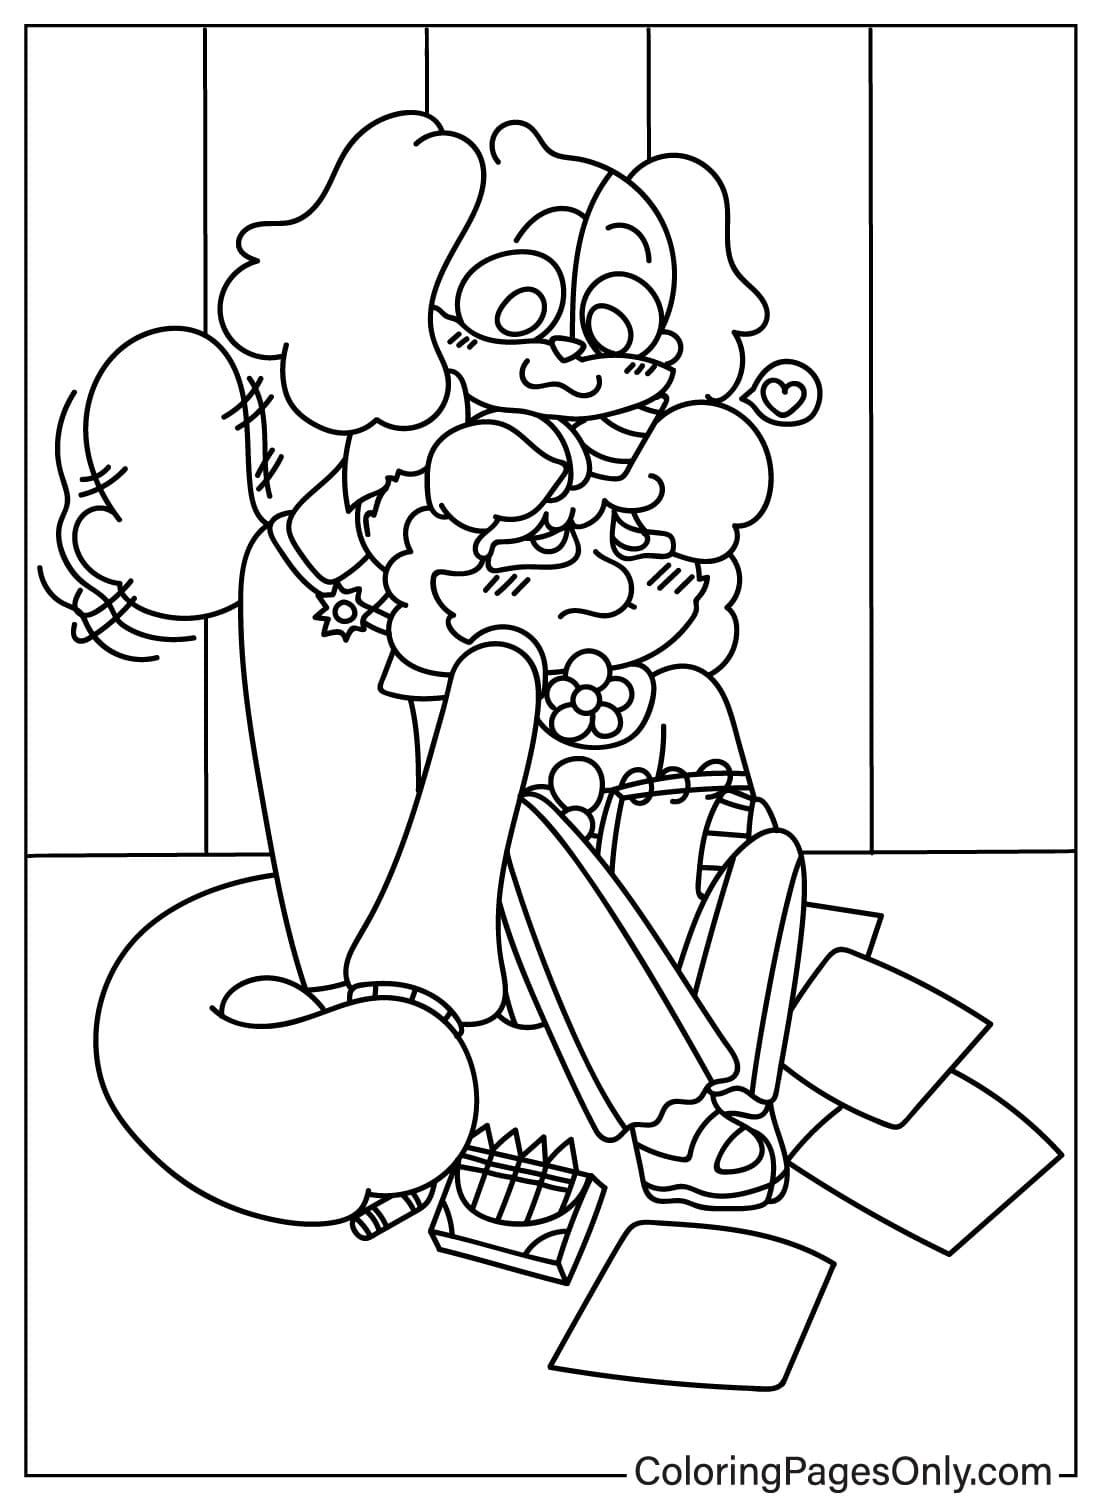 DogDay and CraftyCorn Coloring Page from DogDay